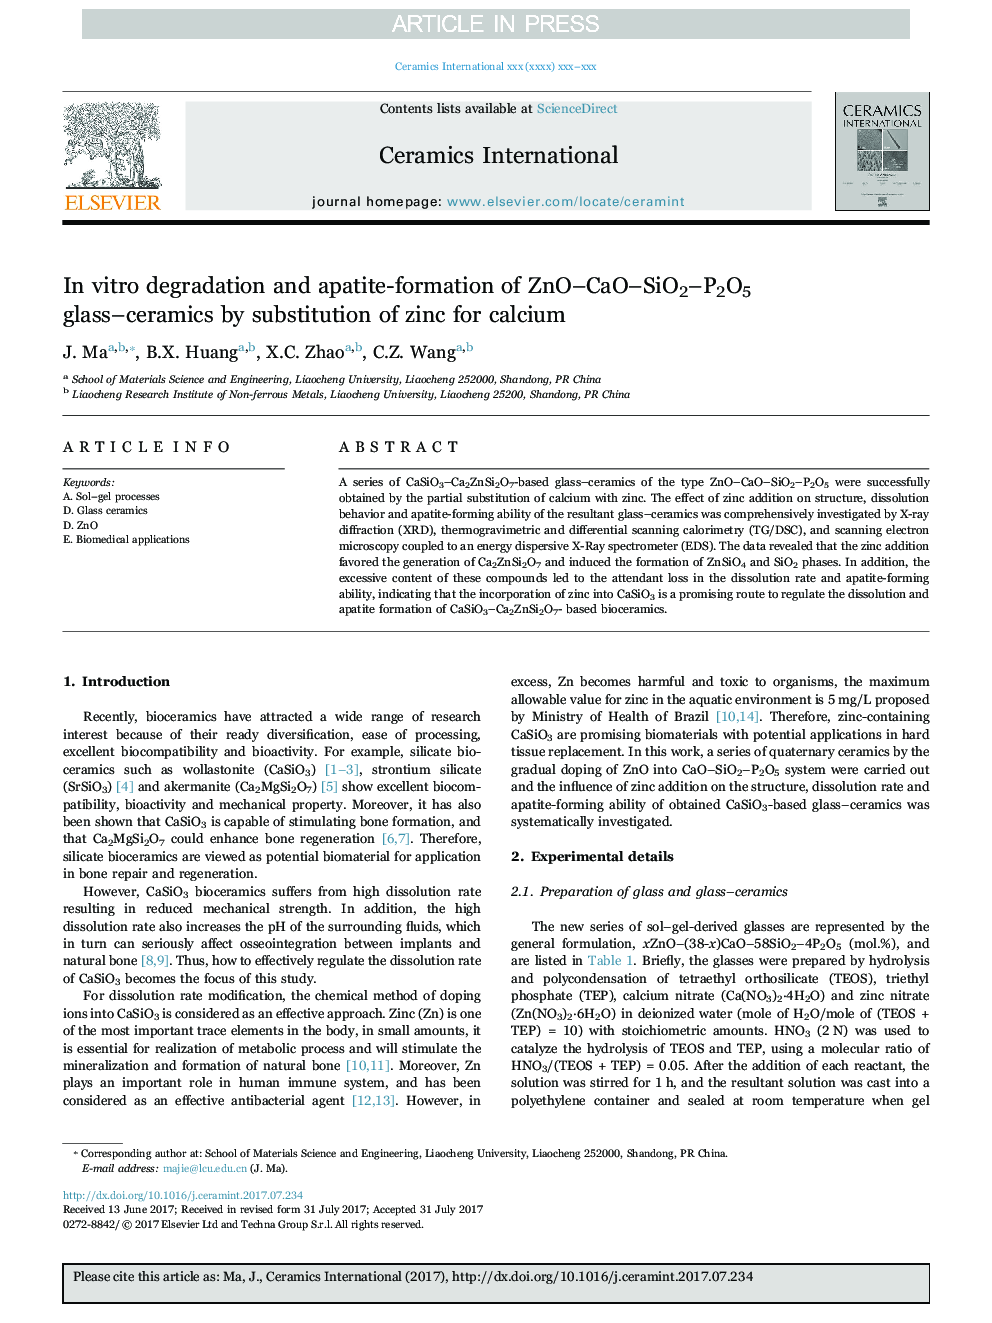 In vitro degradation and apatite-formation of ZnO-CaO-SiO2-P2O5 glass-ceramics by substitution of zinc for calcium